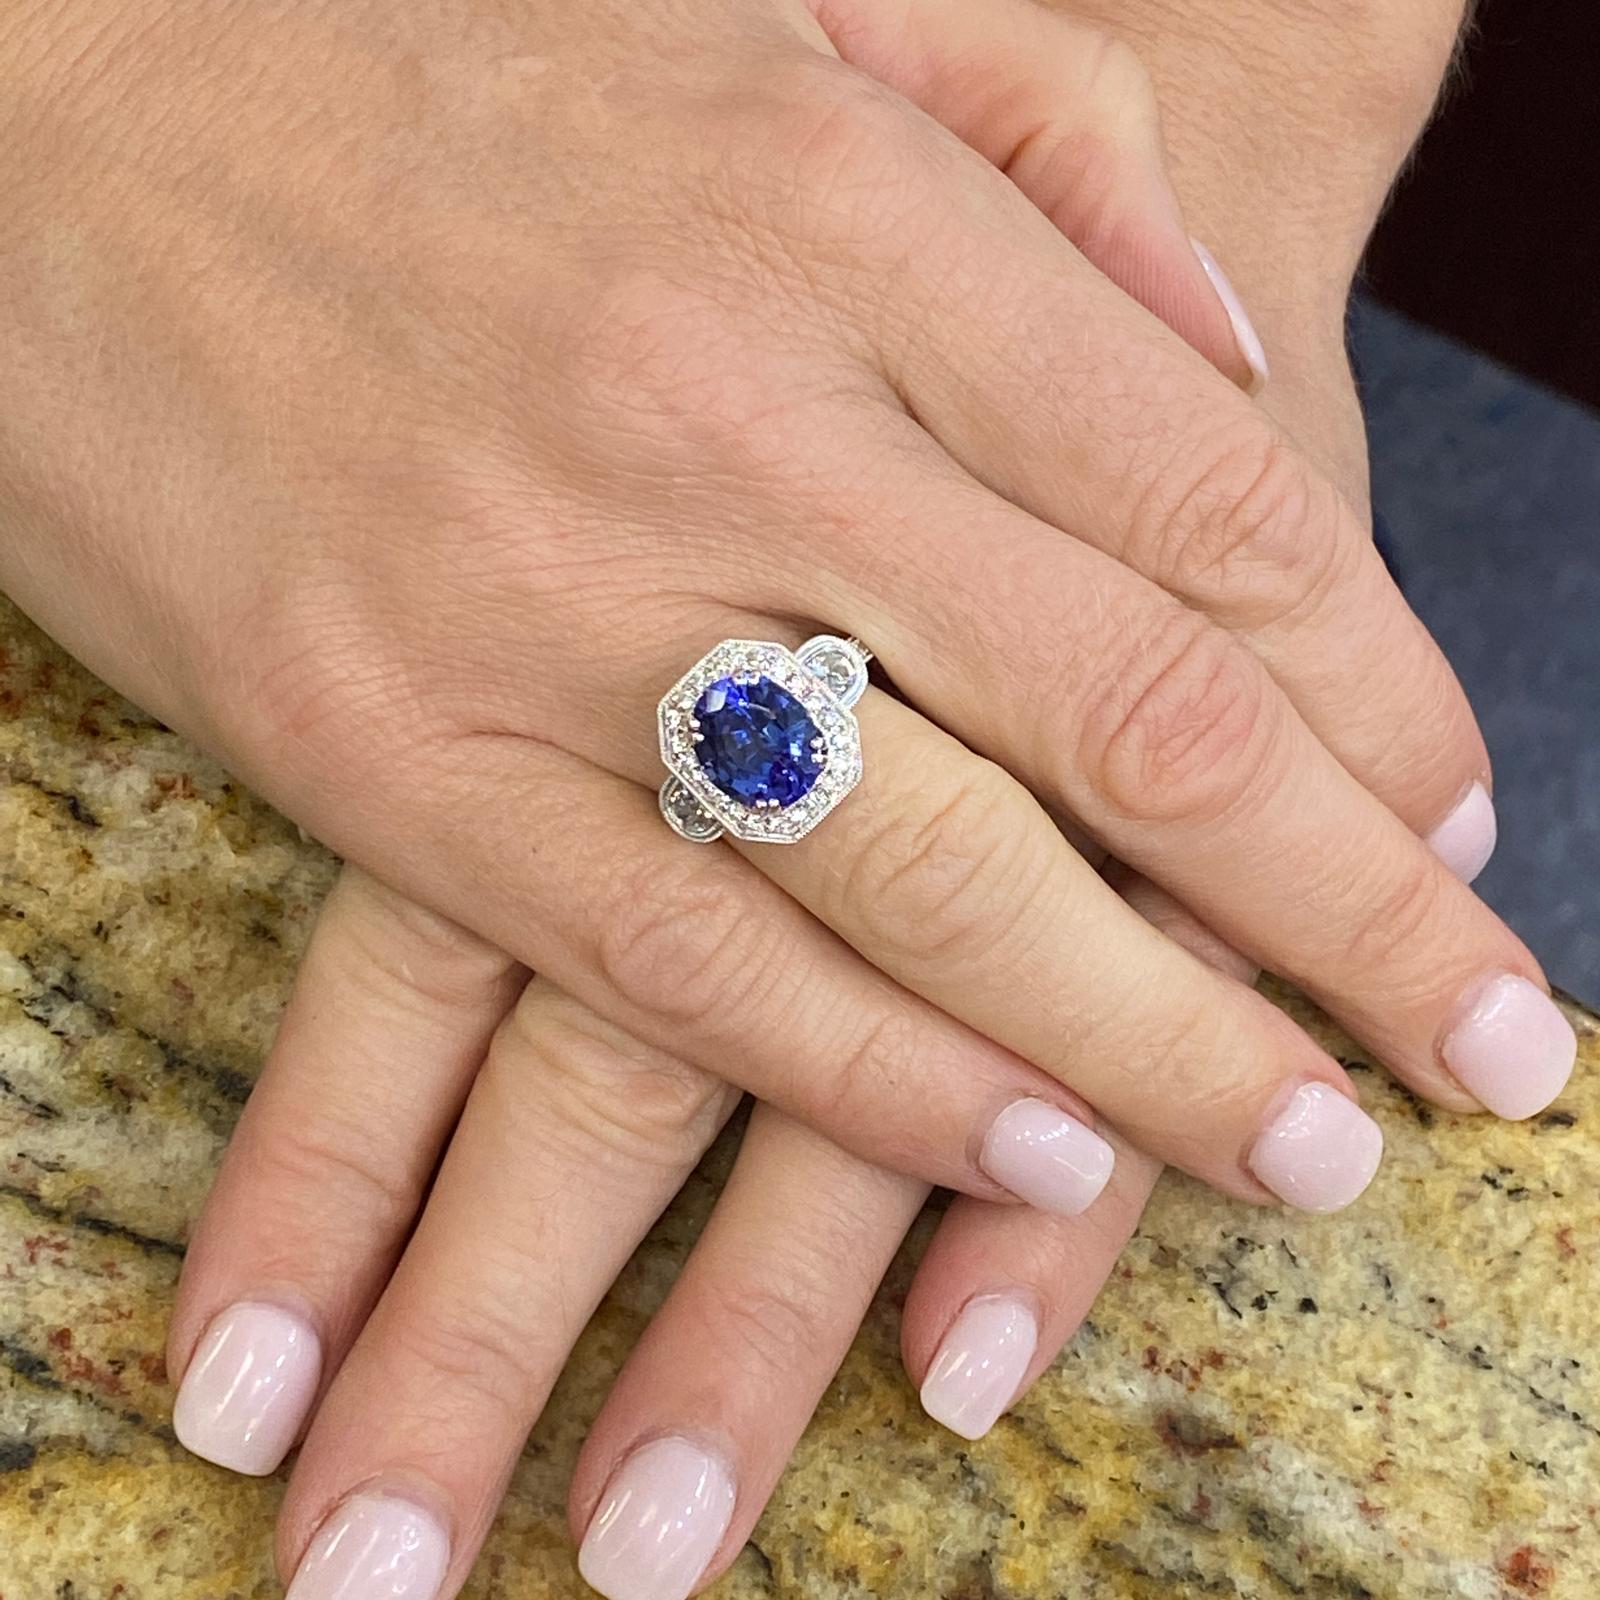 Beautiful oval tanzanite diamond ring fashioned in 18 karat yellow gold. The oval tanzanite weighs 3.50 carats and is set in a modern mounting featuring 2 half moon cut diamonds weighing approximately .50 carat total weight and another 22 round